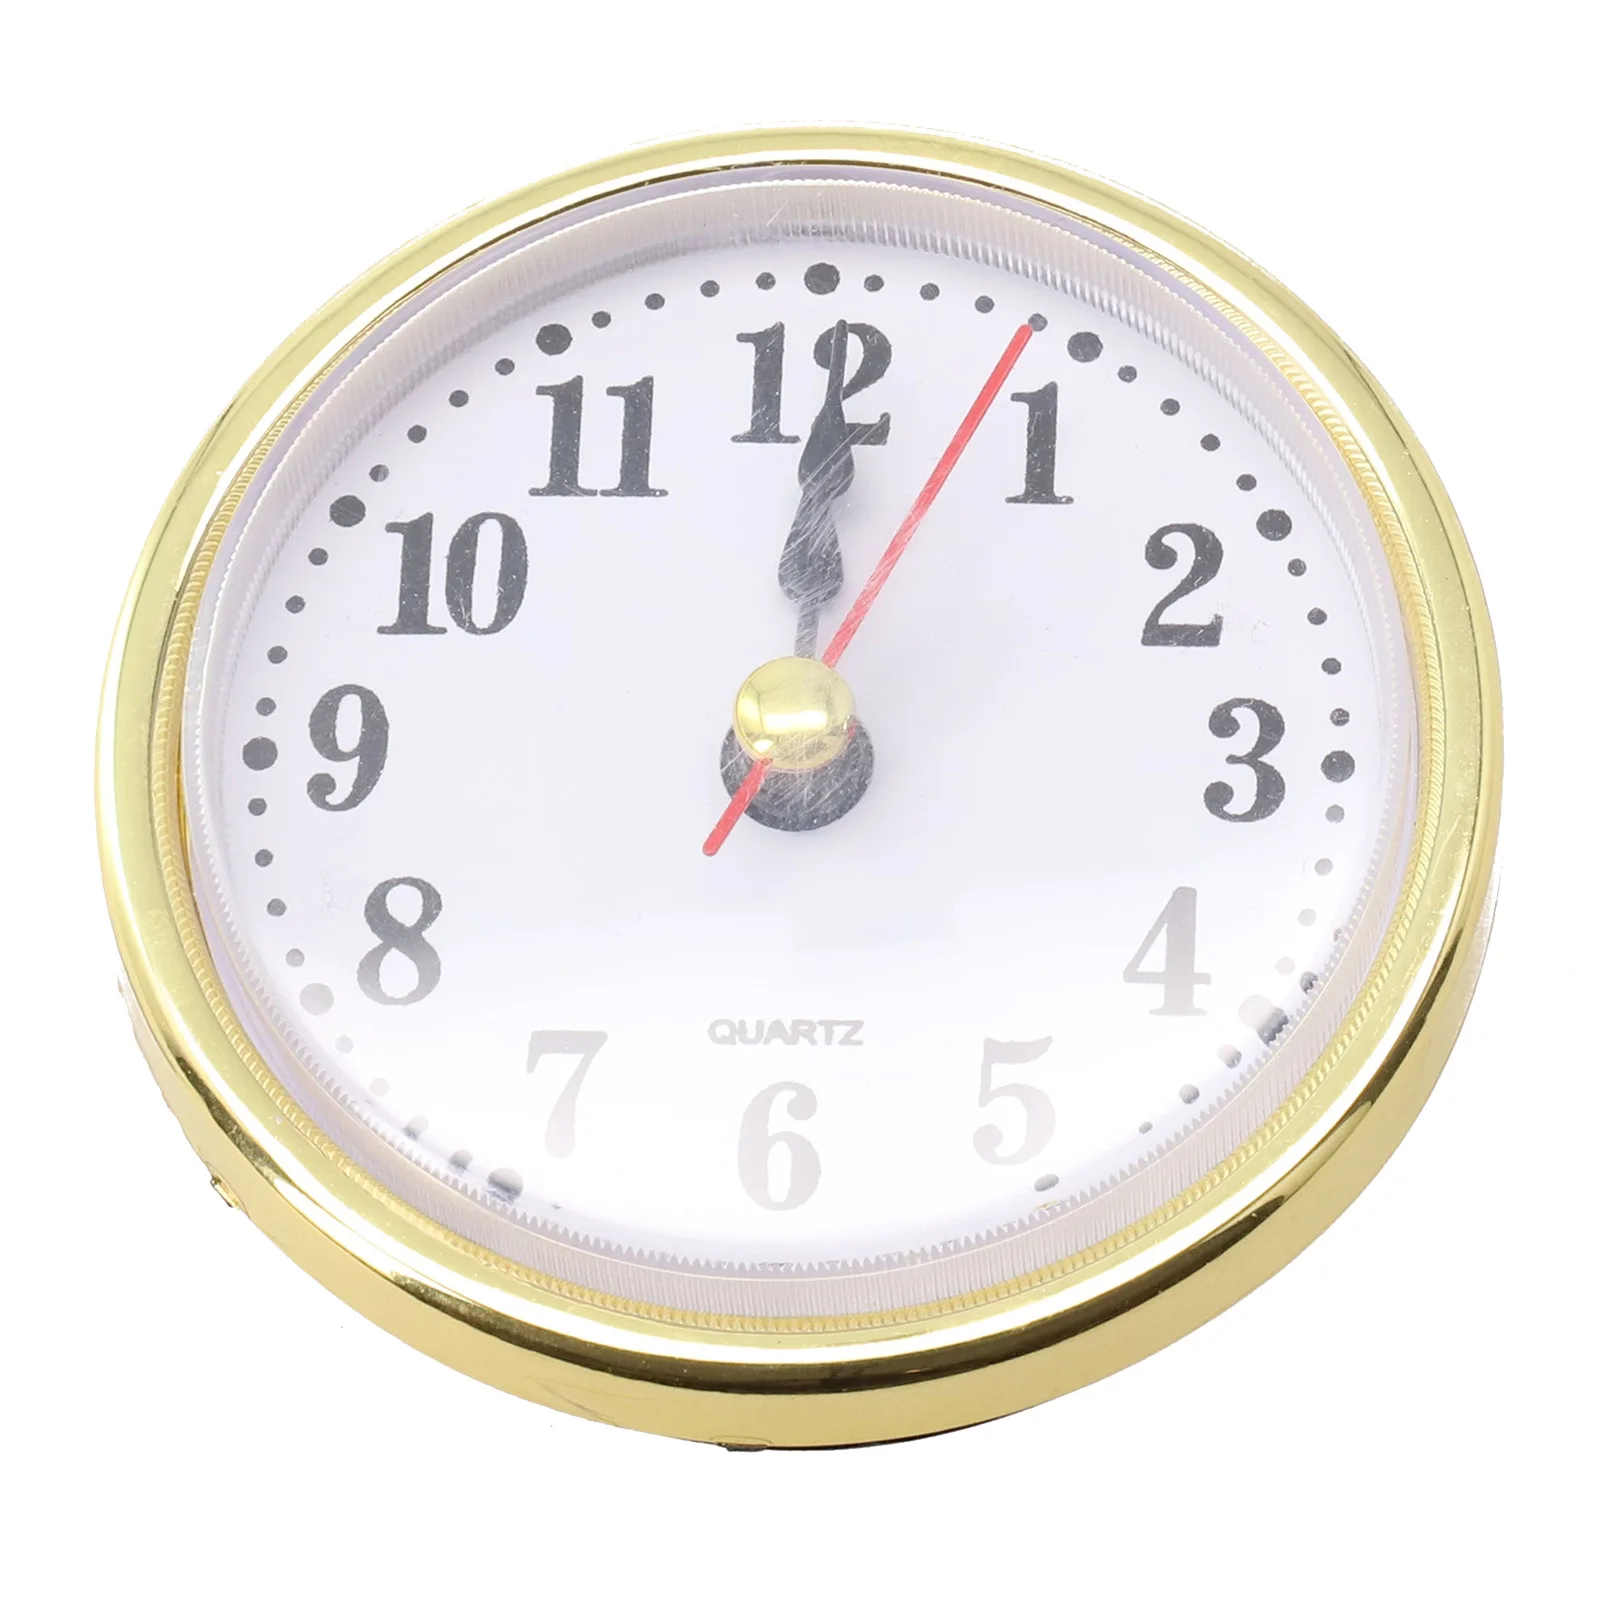 

Insert Quartz Clock Insert 30g Accessories Clear Lens Gold Colored Trim Parts Replacement Affordable Brand New